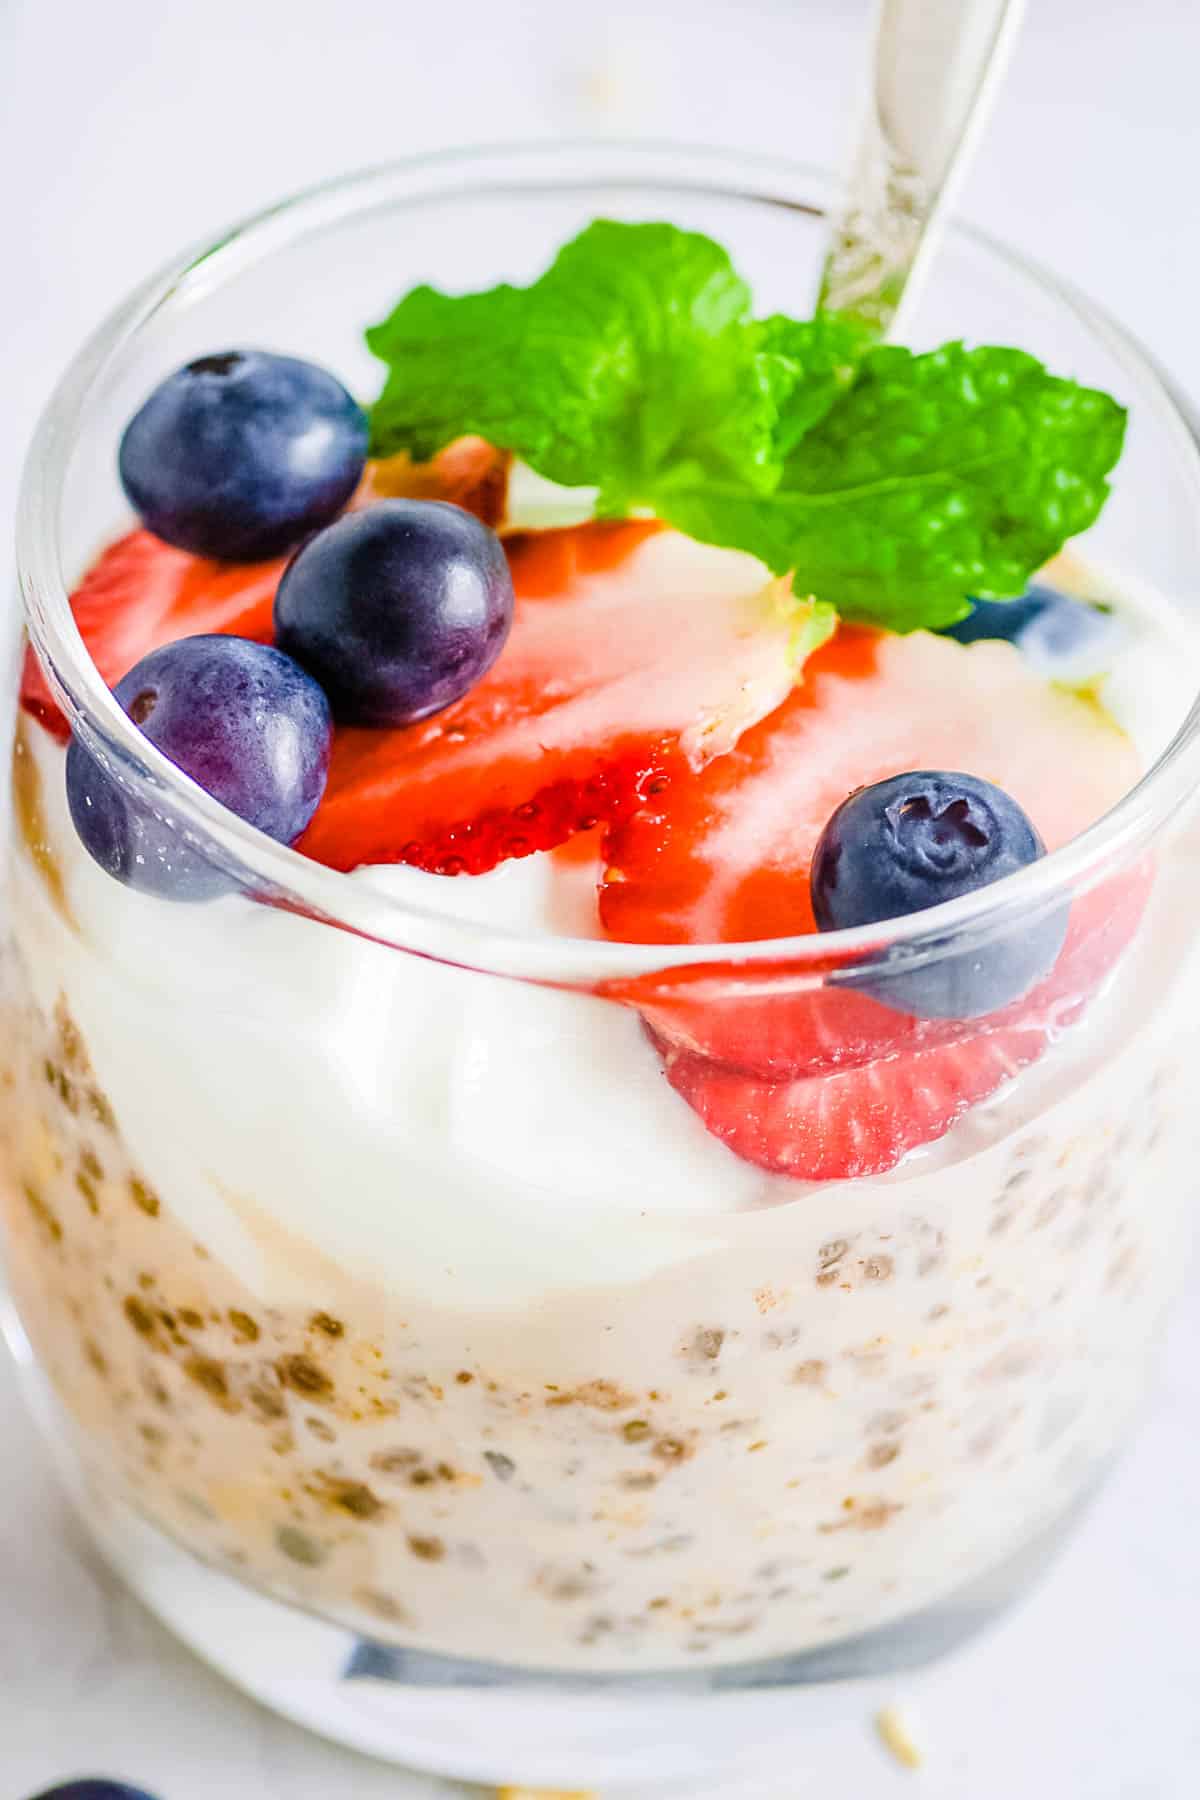 High protein overnight oats served in glasses with fresh berries and mint as a garnish.